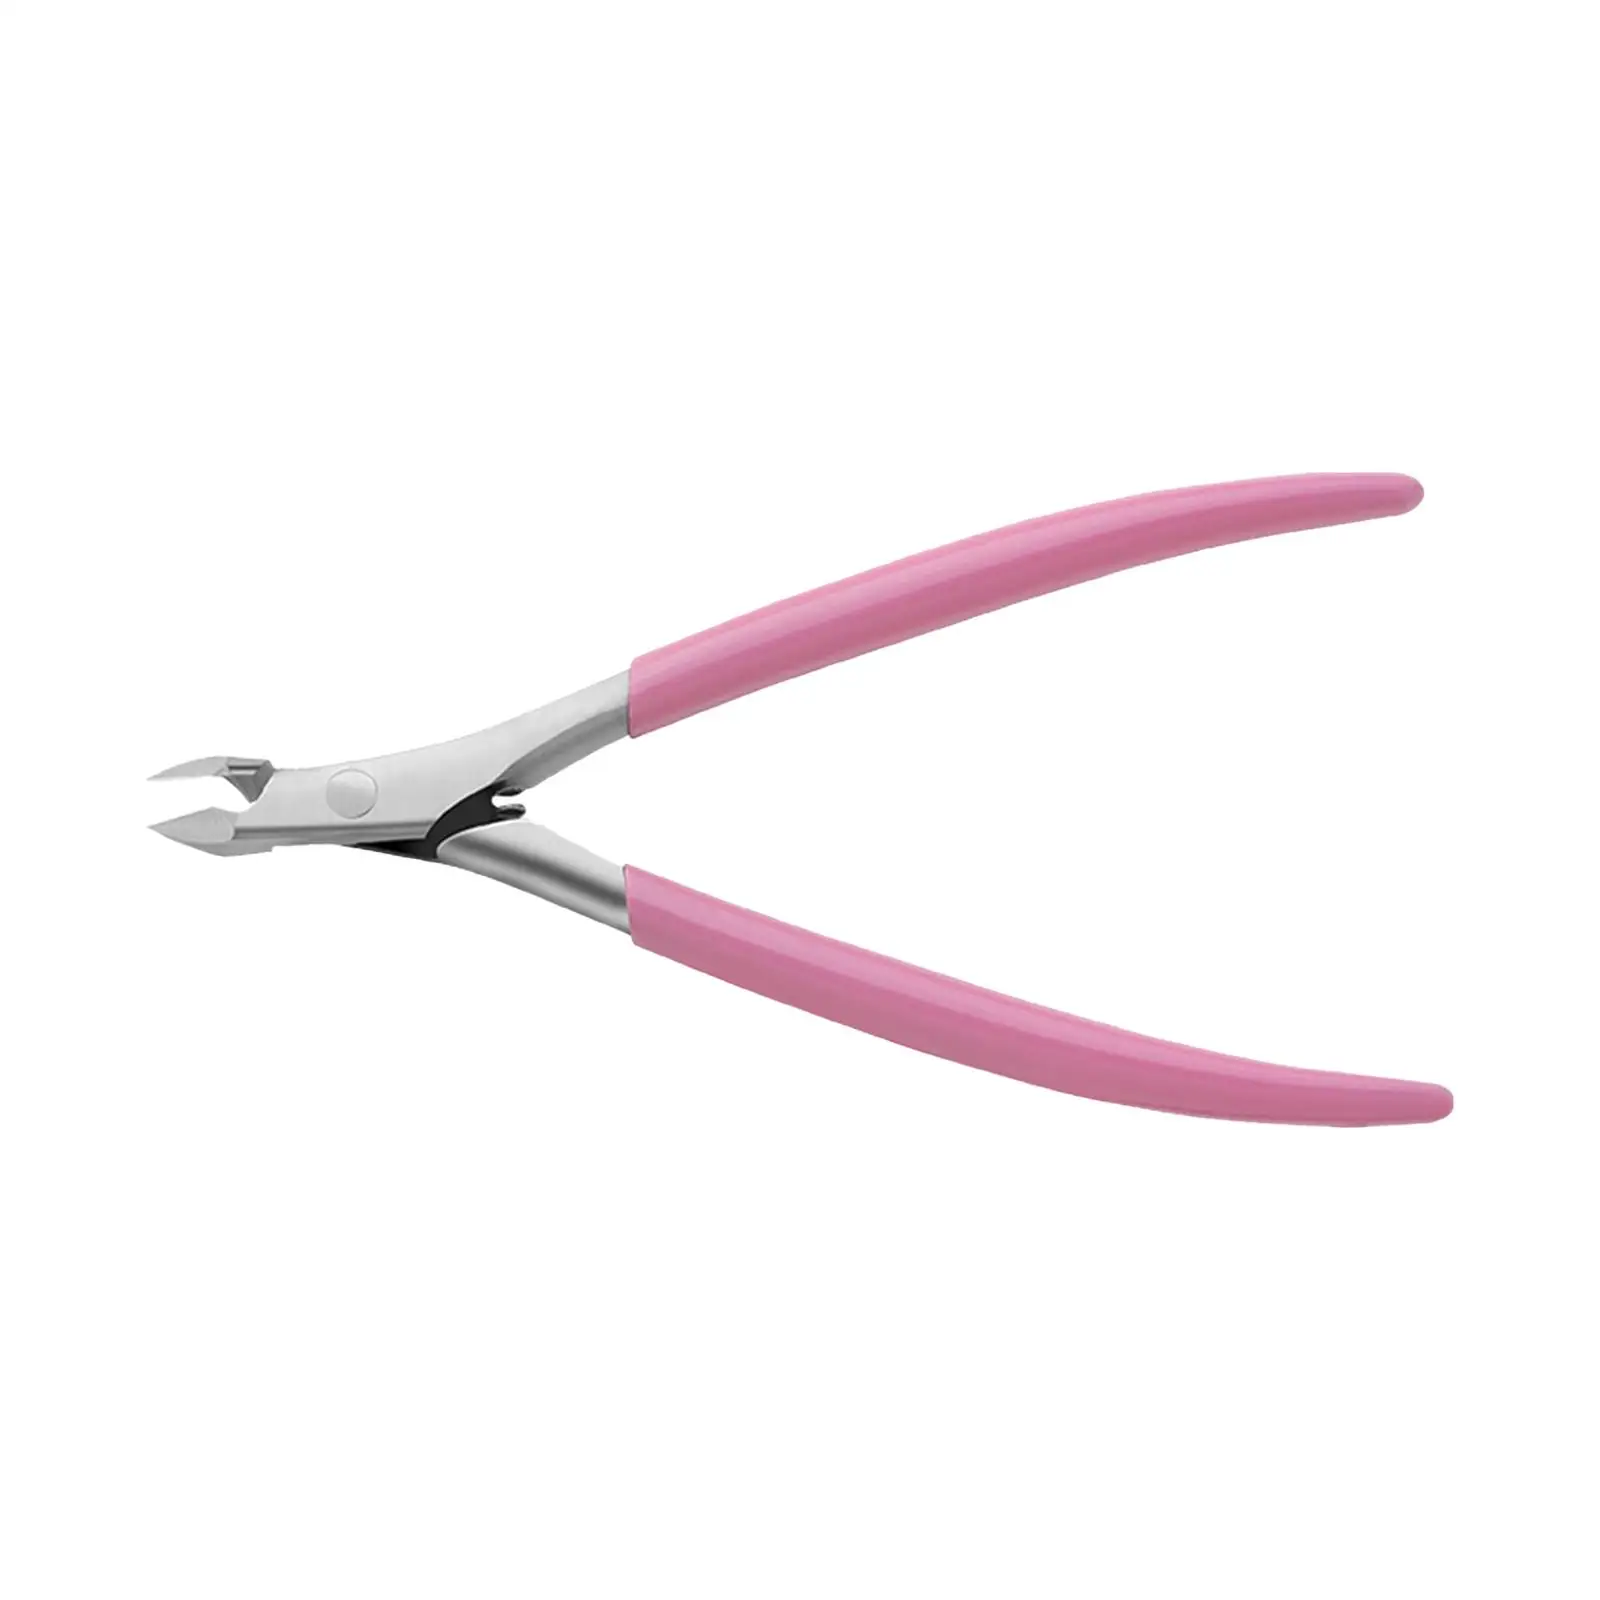 Professional Cuticle Trimmer Nippers Ingrown Toenail Clippers Pointed High Precision Callus Remover for Salon Home SPA